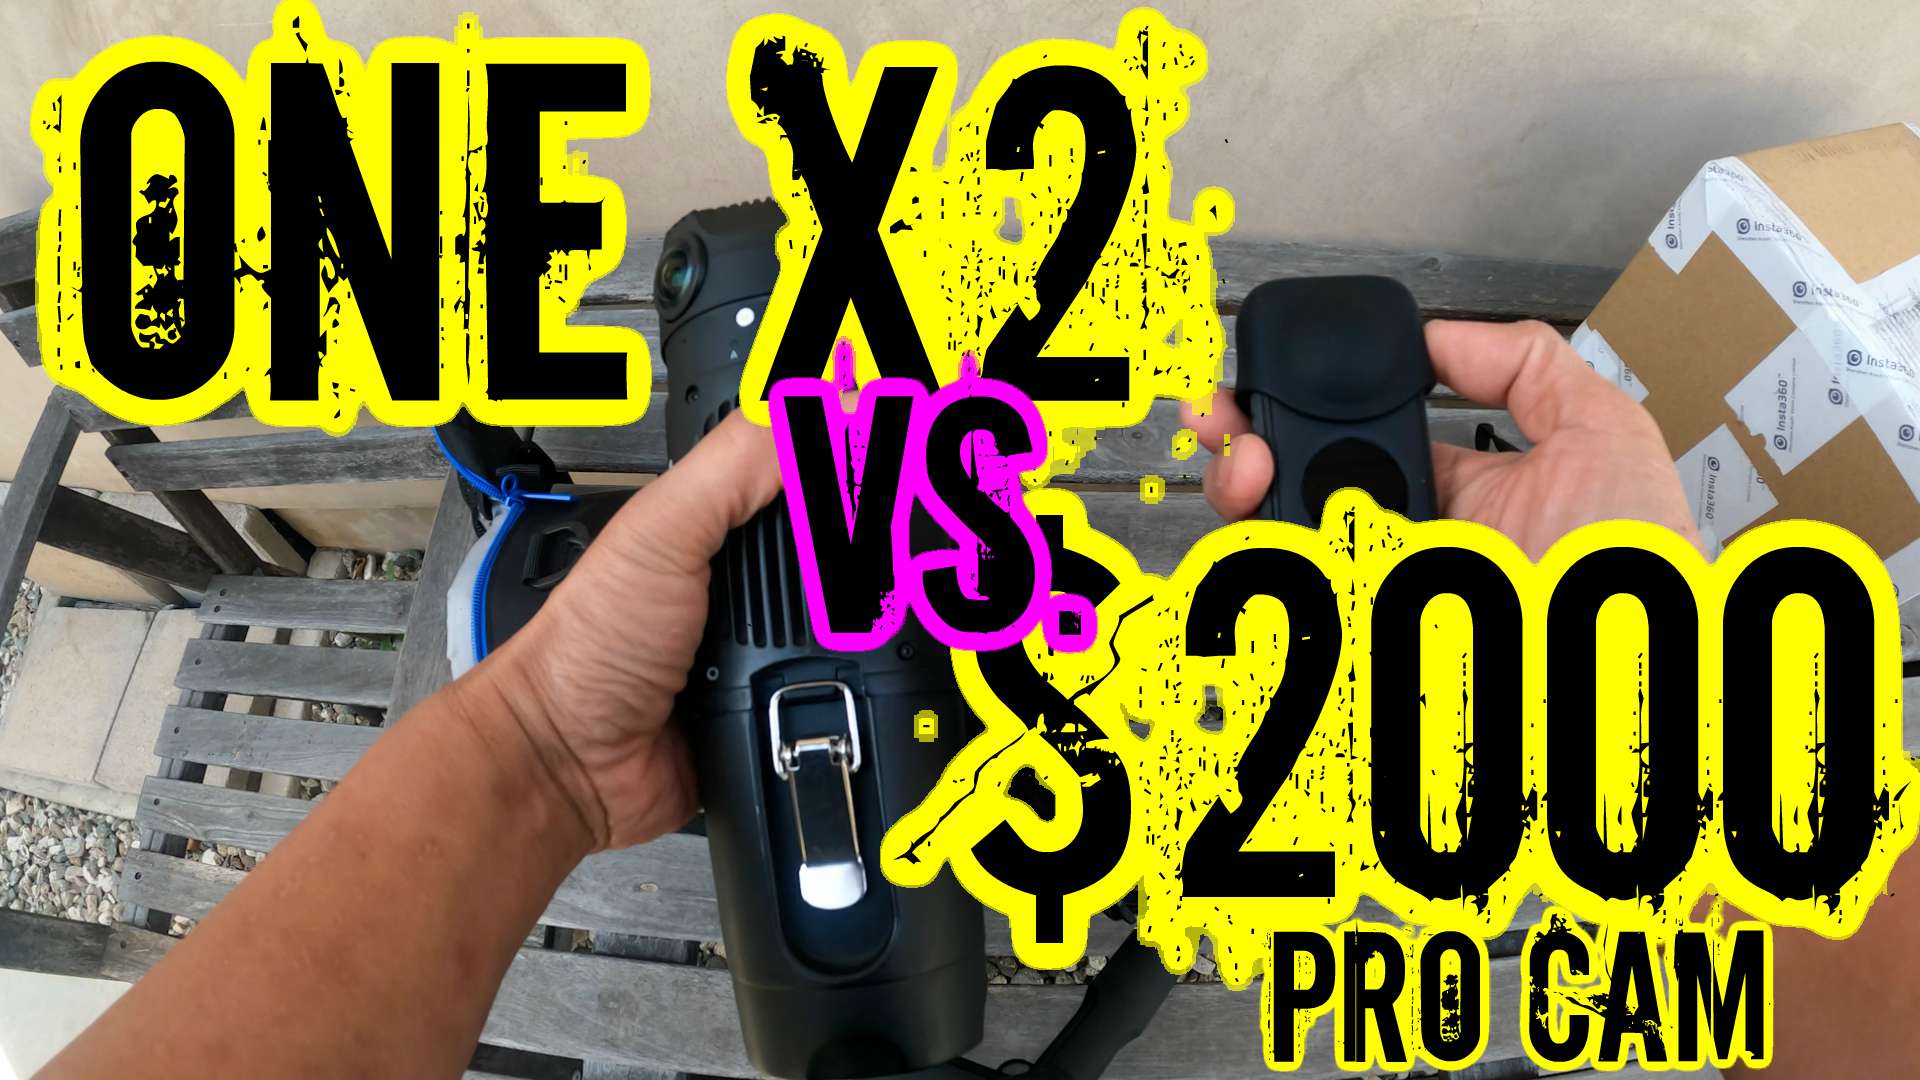 Insta360 ONE X2 Review and Resource Page with Comparison, Samples and FAQ  (updated December 19, 2020) - 360 Rumors